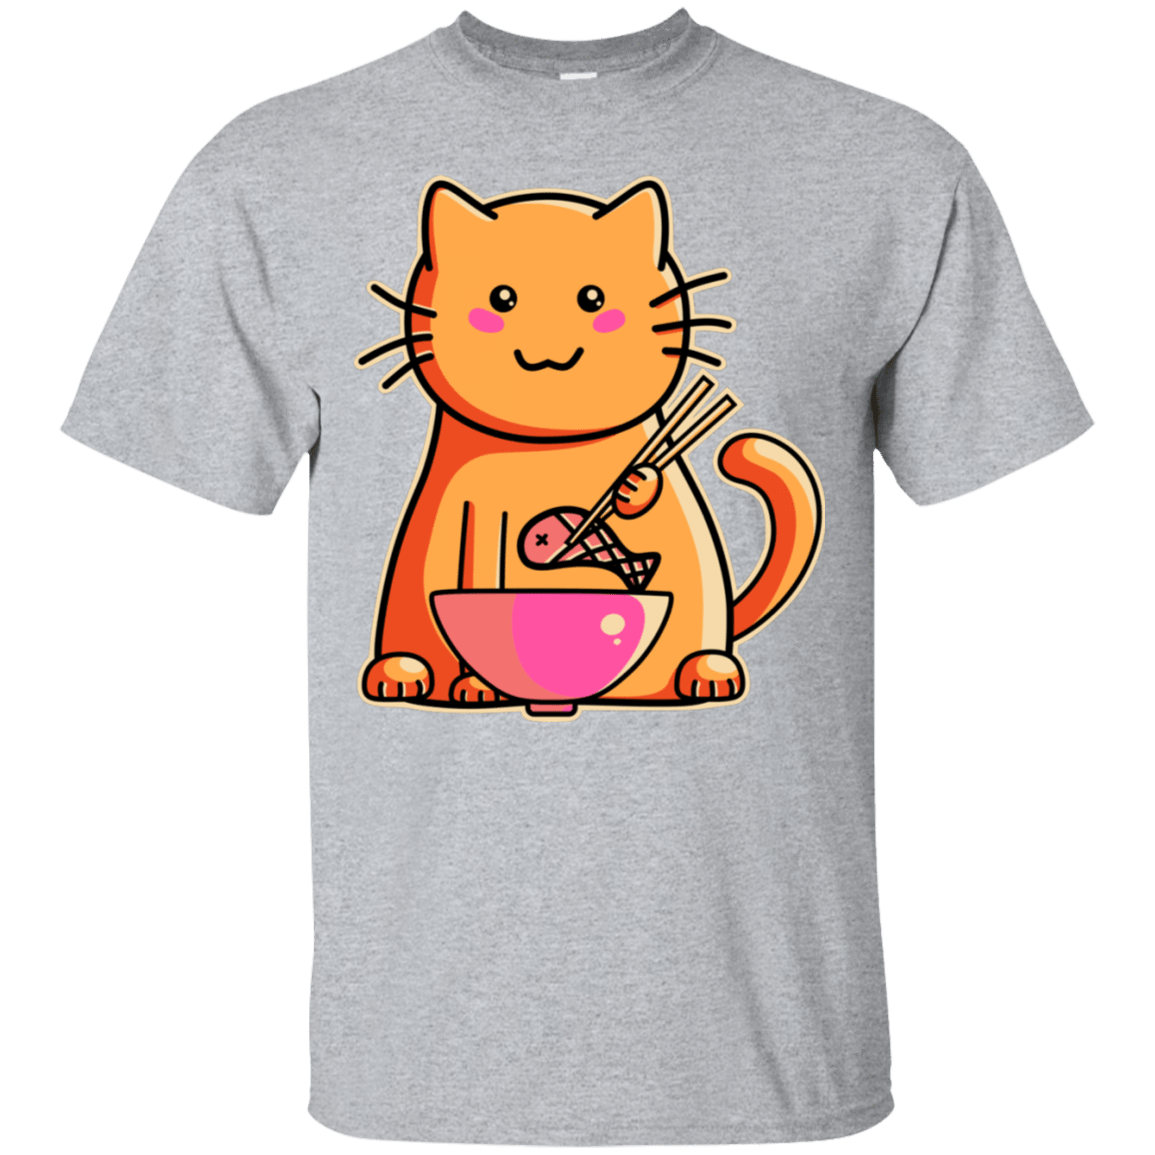 T-Shirts Sport Grey / S Cats Favourite Meal T-Shirt